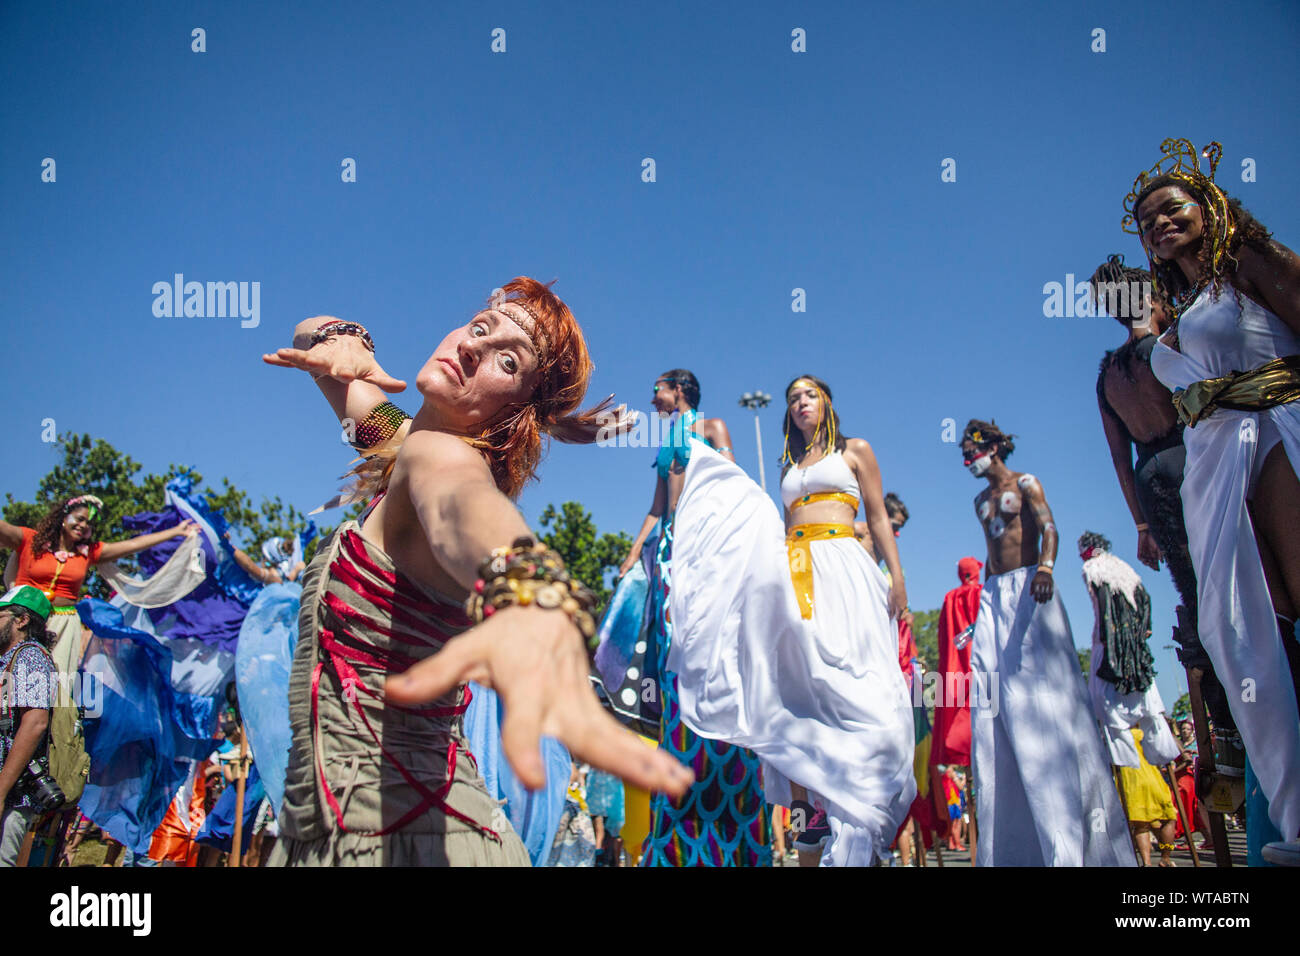 Orquestra VoadoraÂ´s  members with colorful costumes and stilts Stock Photo